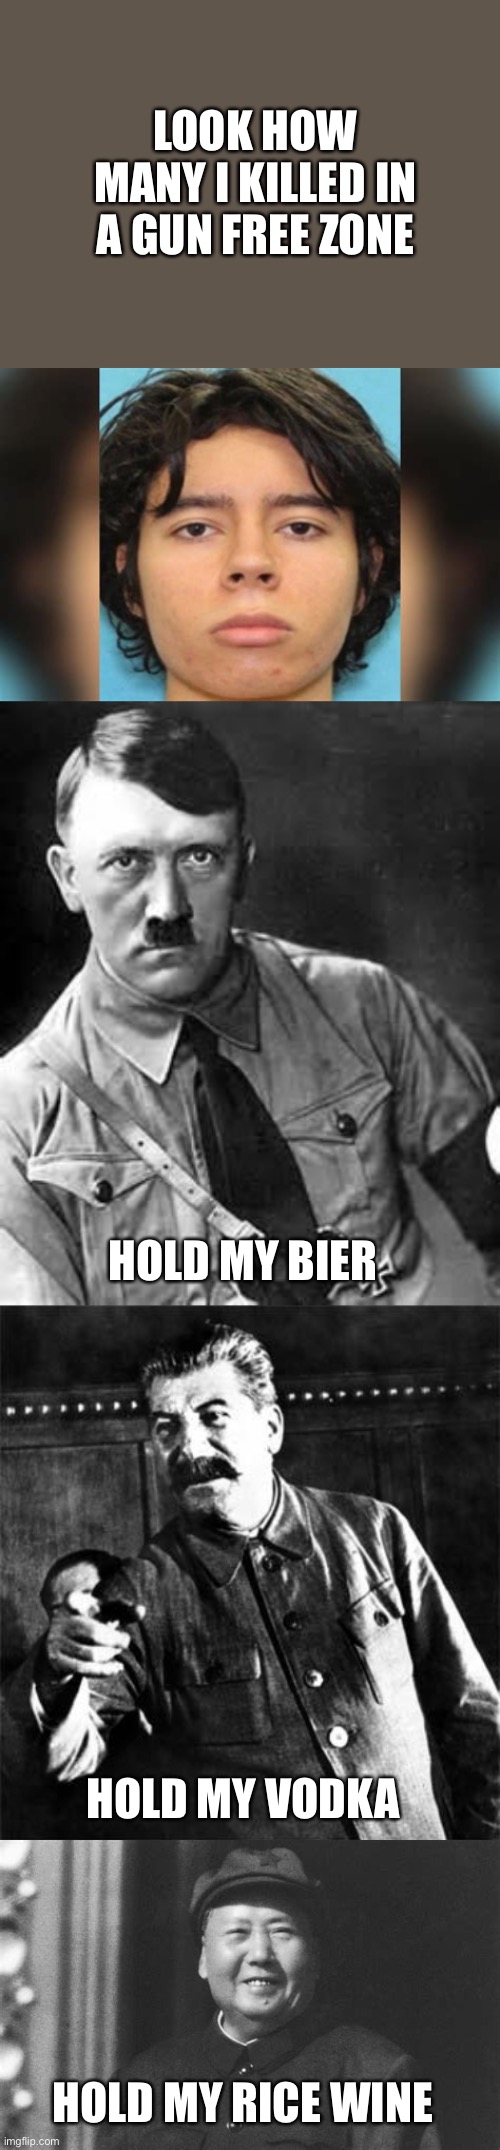 History repeats itself- gun free zones do not work, no matter the size. |  LOOK HOW MANY I KILLED IN A GUN FREE ZONE; HOLD MY BIER; HOLD MY VODKA; HOLD MY RICE WINE | image tagged in adolf hitler,stalin,mao,school shooters,gun free zone,fail | made w/ Imgflip meme maker